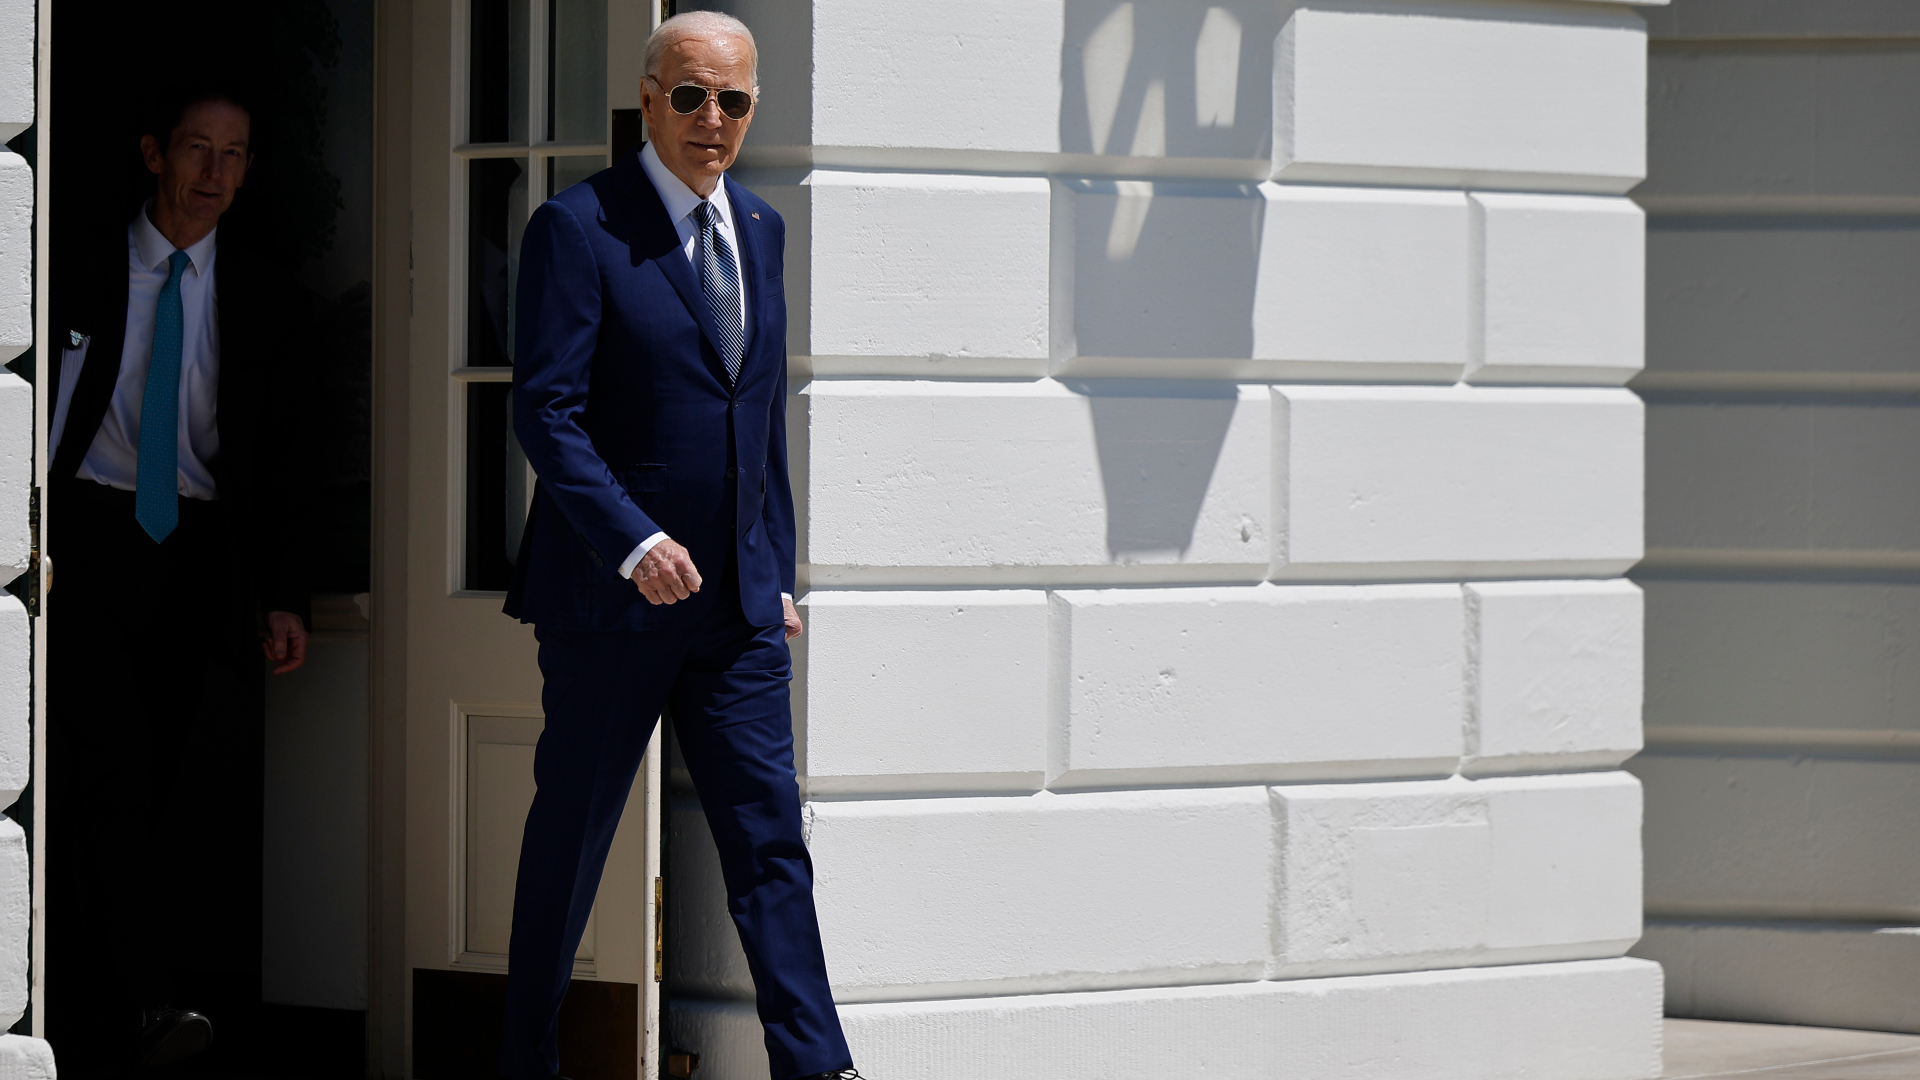 Biden Says He Thought About Jumping From Delaware Memorial Bridge After 1972 Deaths of Wife and Daughter